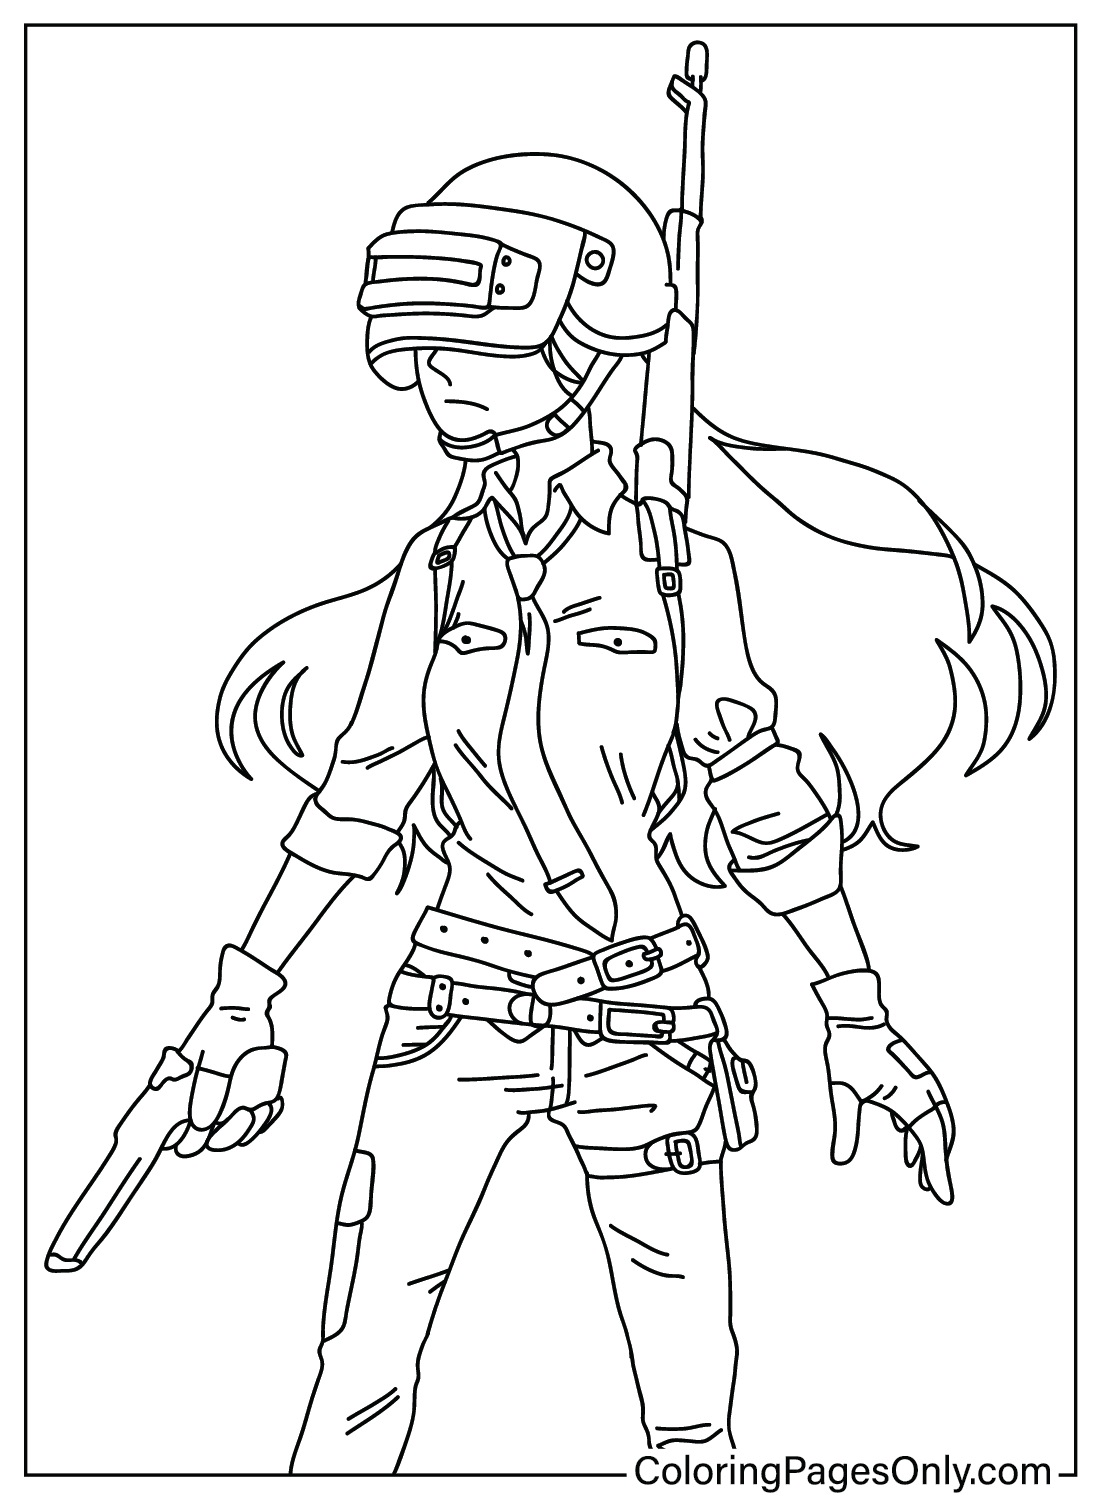 Coloring Page Pubg from PUBG